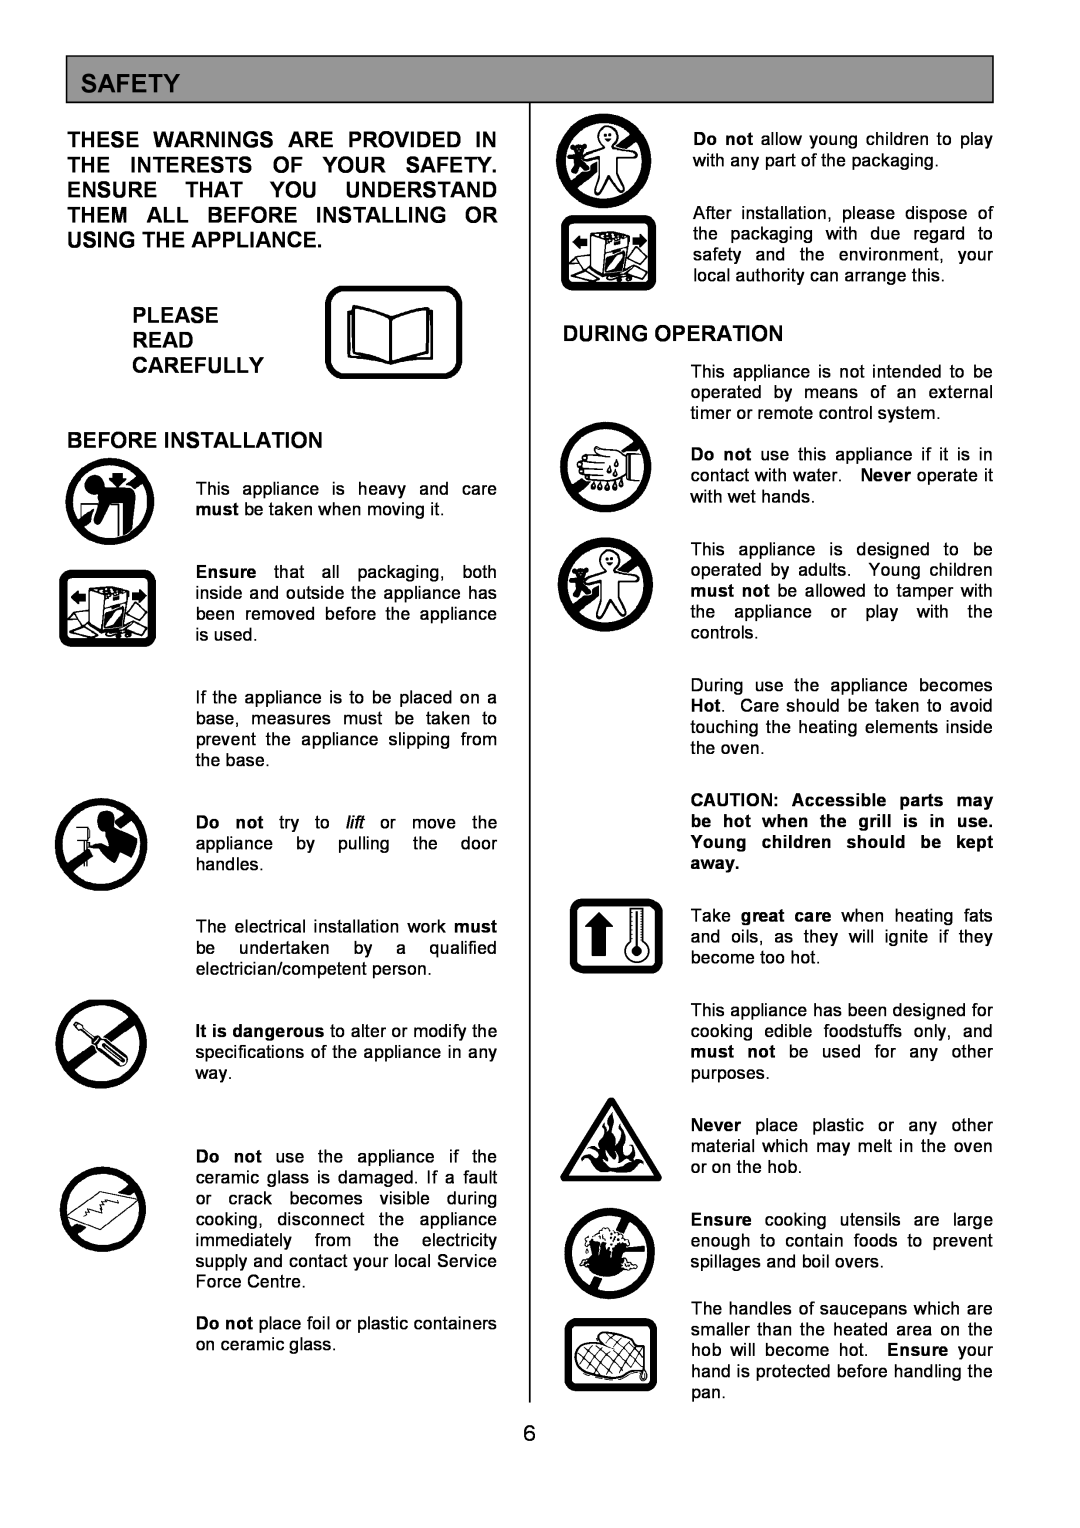 Tricity Bendix DSIE456 installation instructions Safety, Please Read Carefully Before Installation, During Operation 